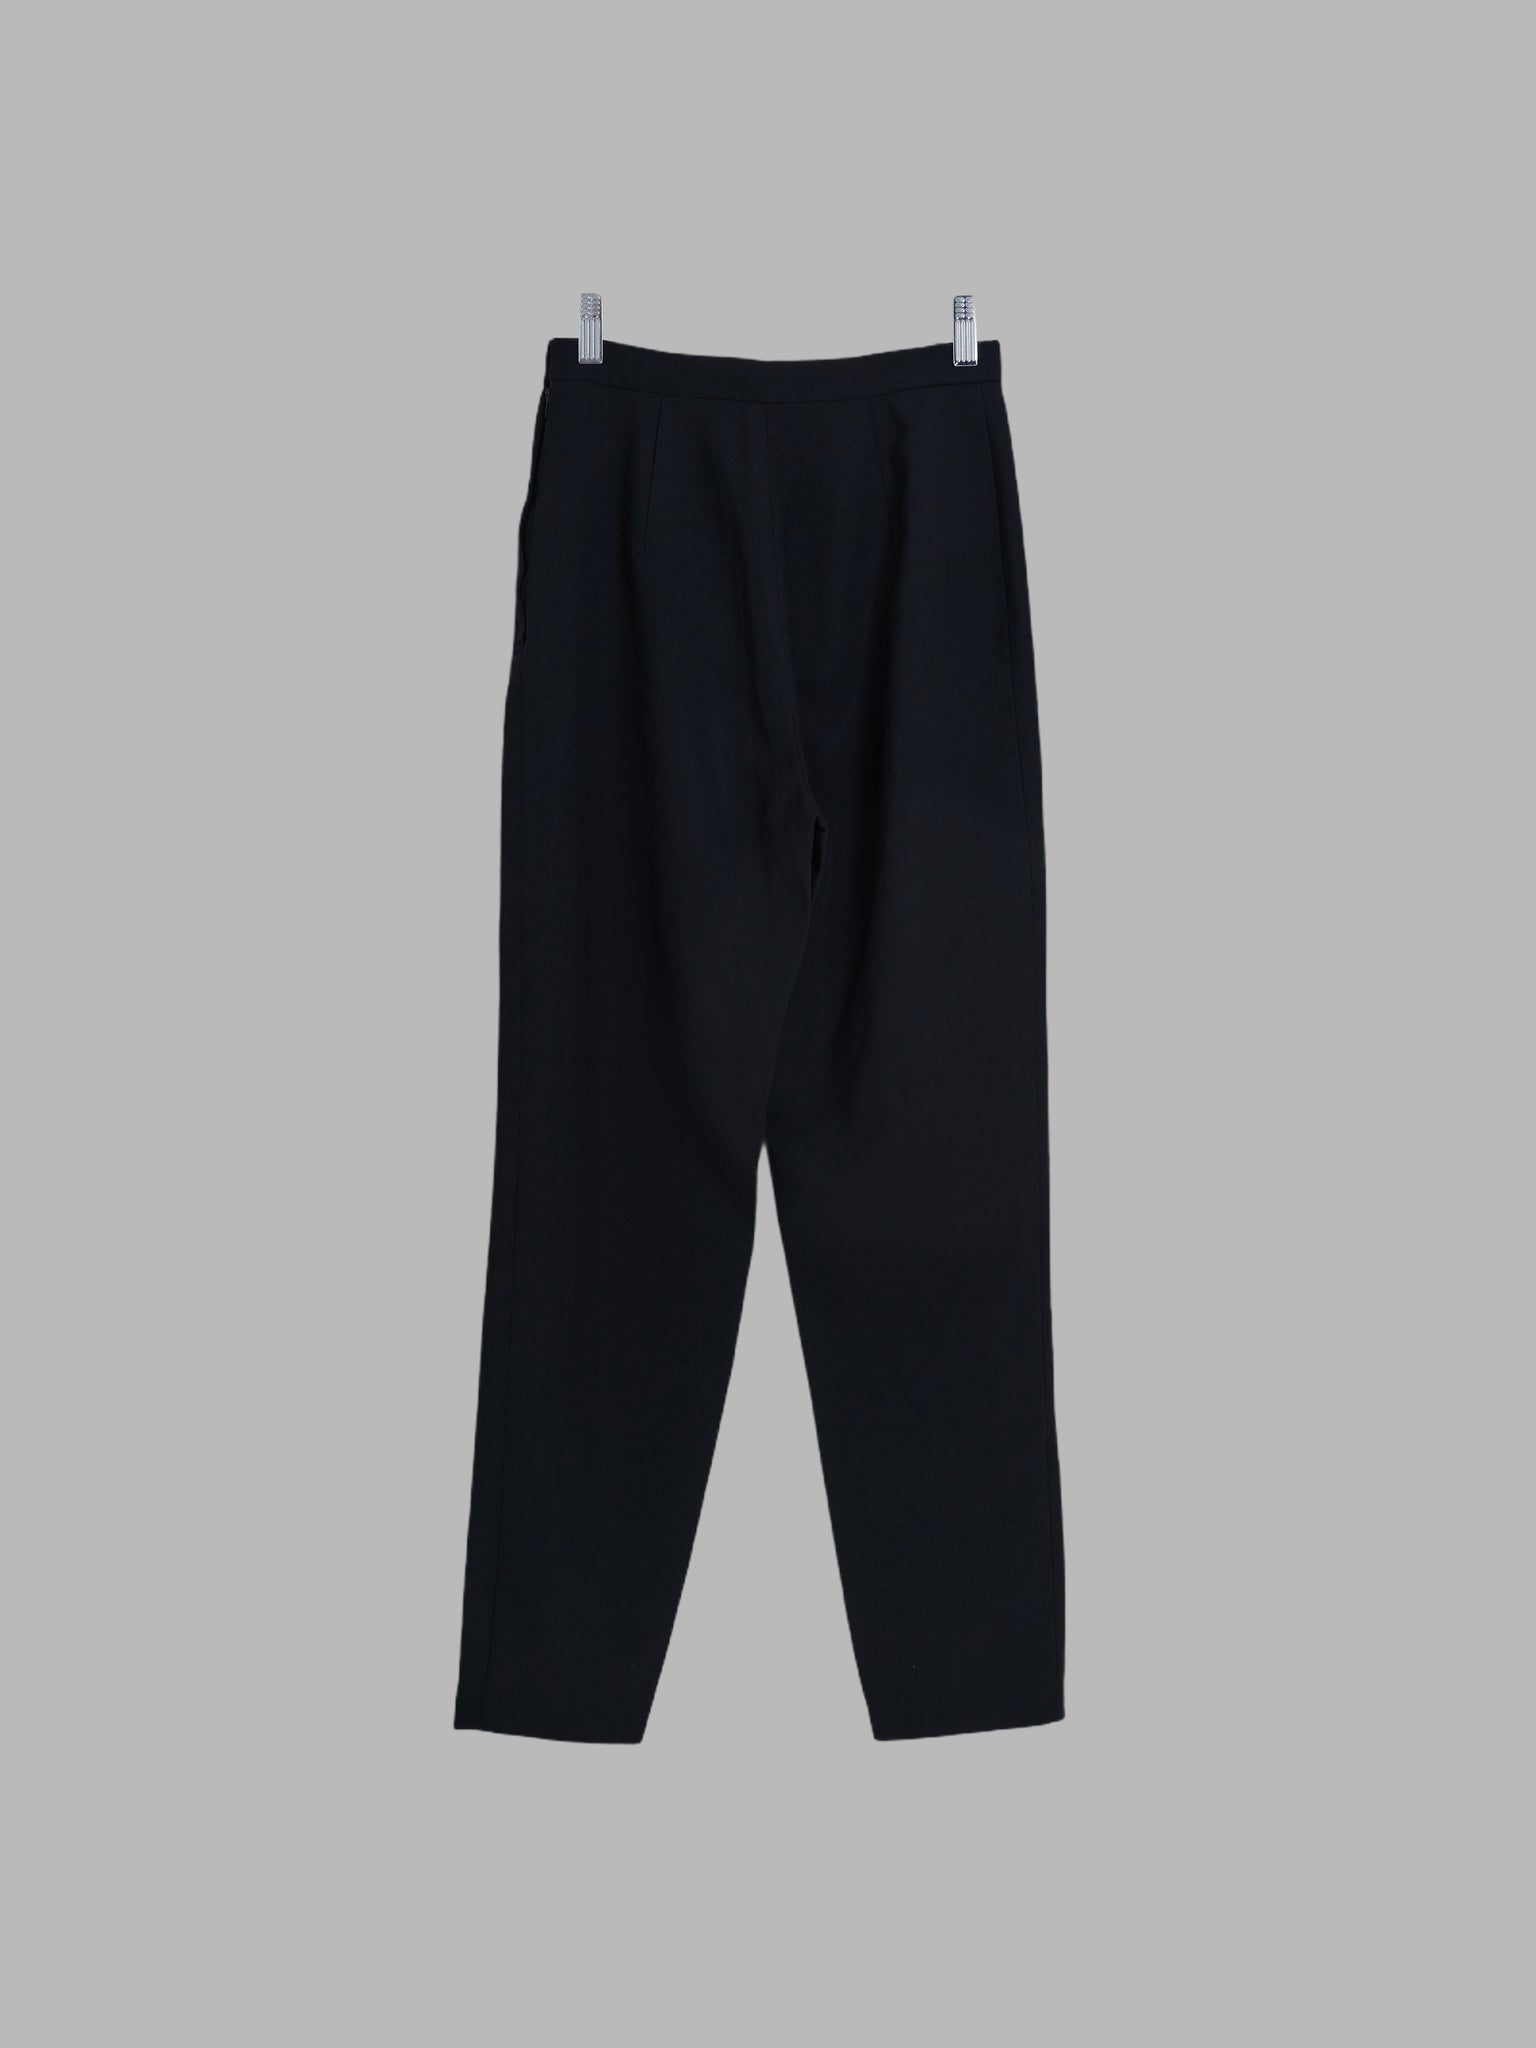 Tricot Comme des Garcons 1991 black wool side zip tapered trousers